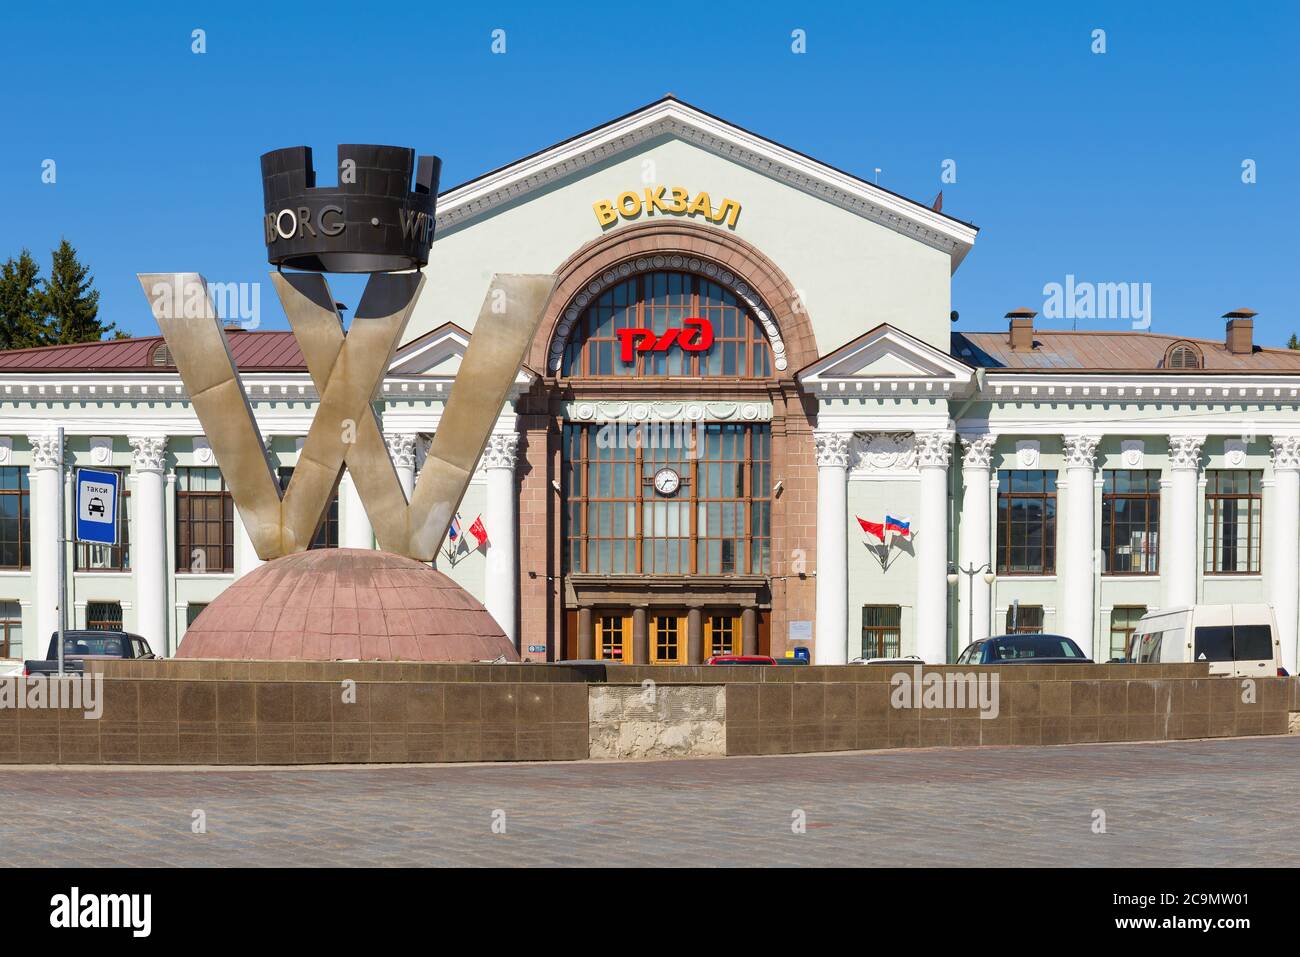 VYBORG, RUSSIA - MAY 10, 2020: The letter 'W' - a symbol of the city of Vyborg close-up on the background of the building of the railway station Stock Photo